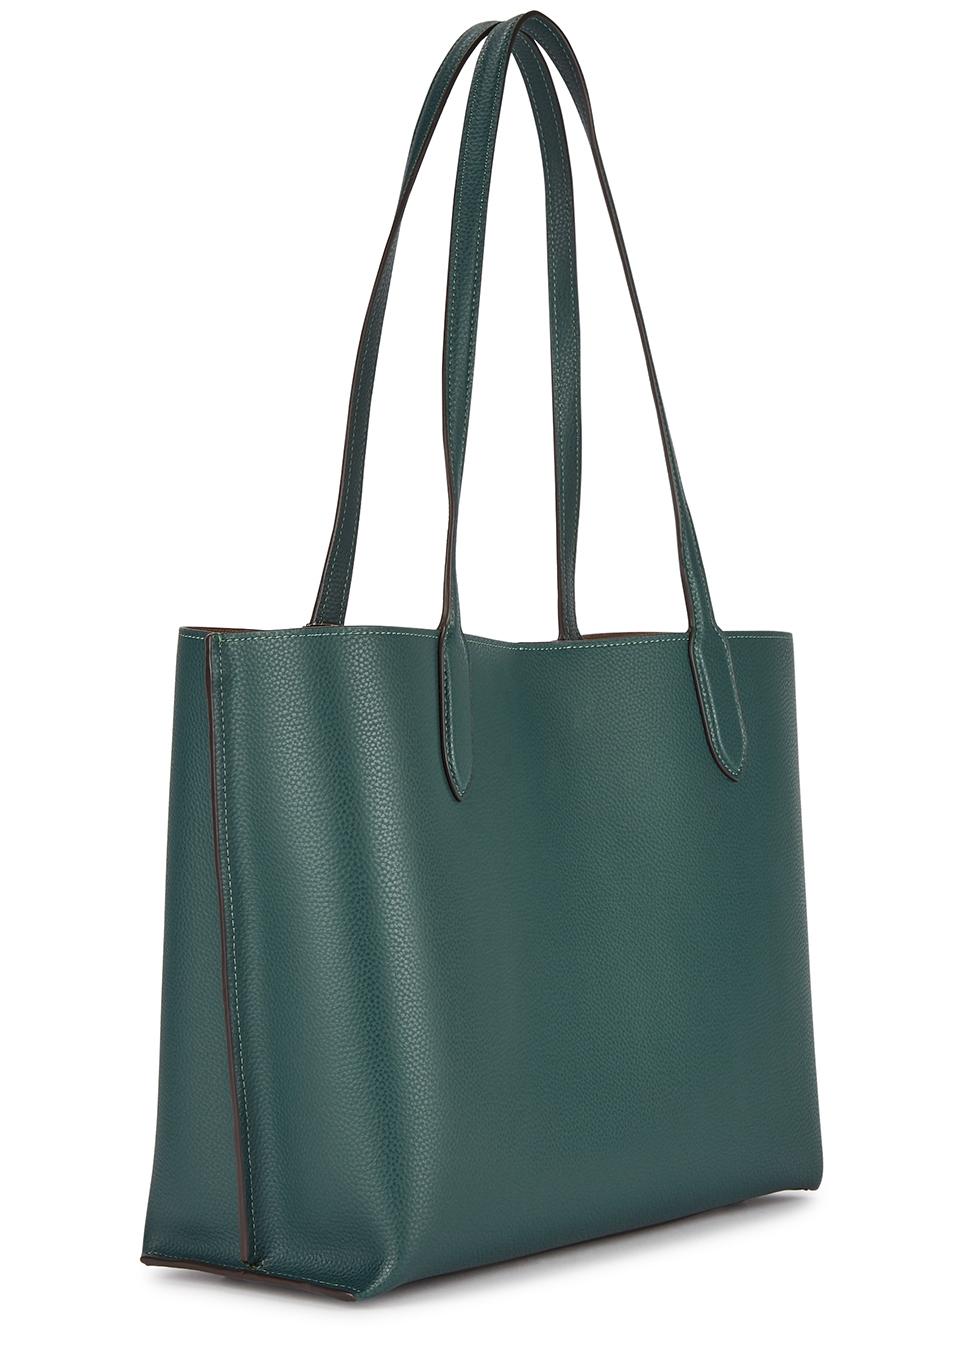 Share 72+ green coach bag best - in.cdgdbentre